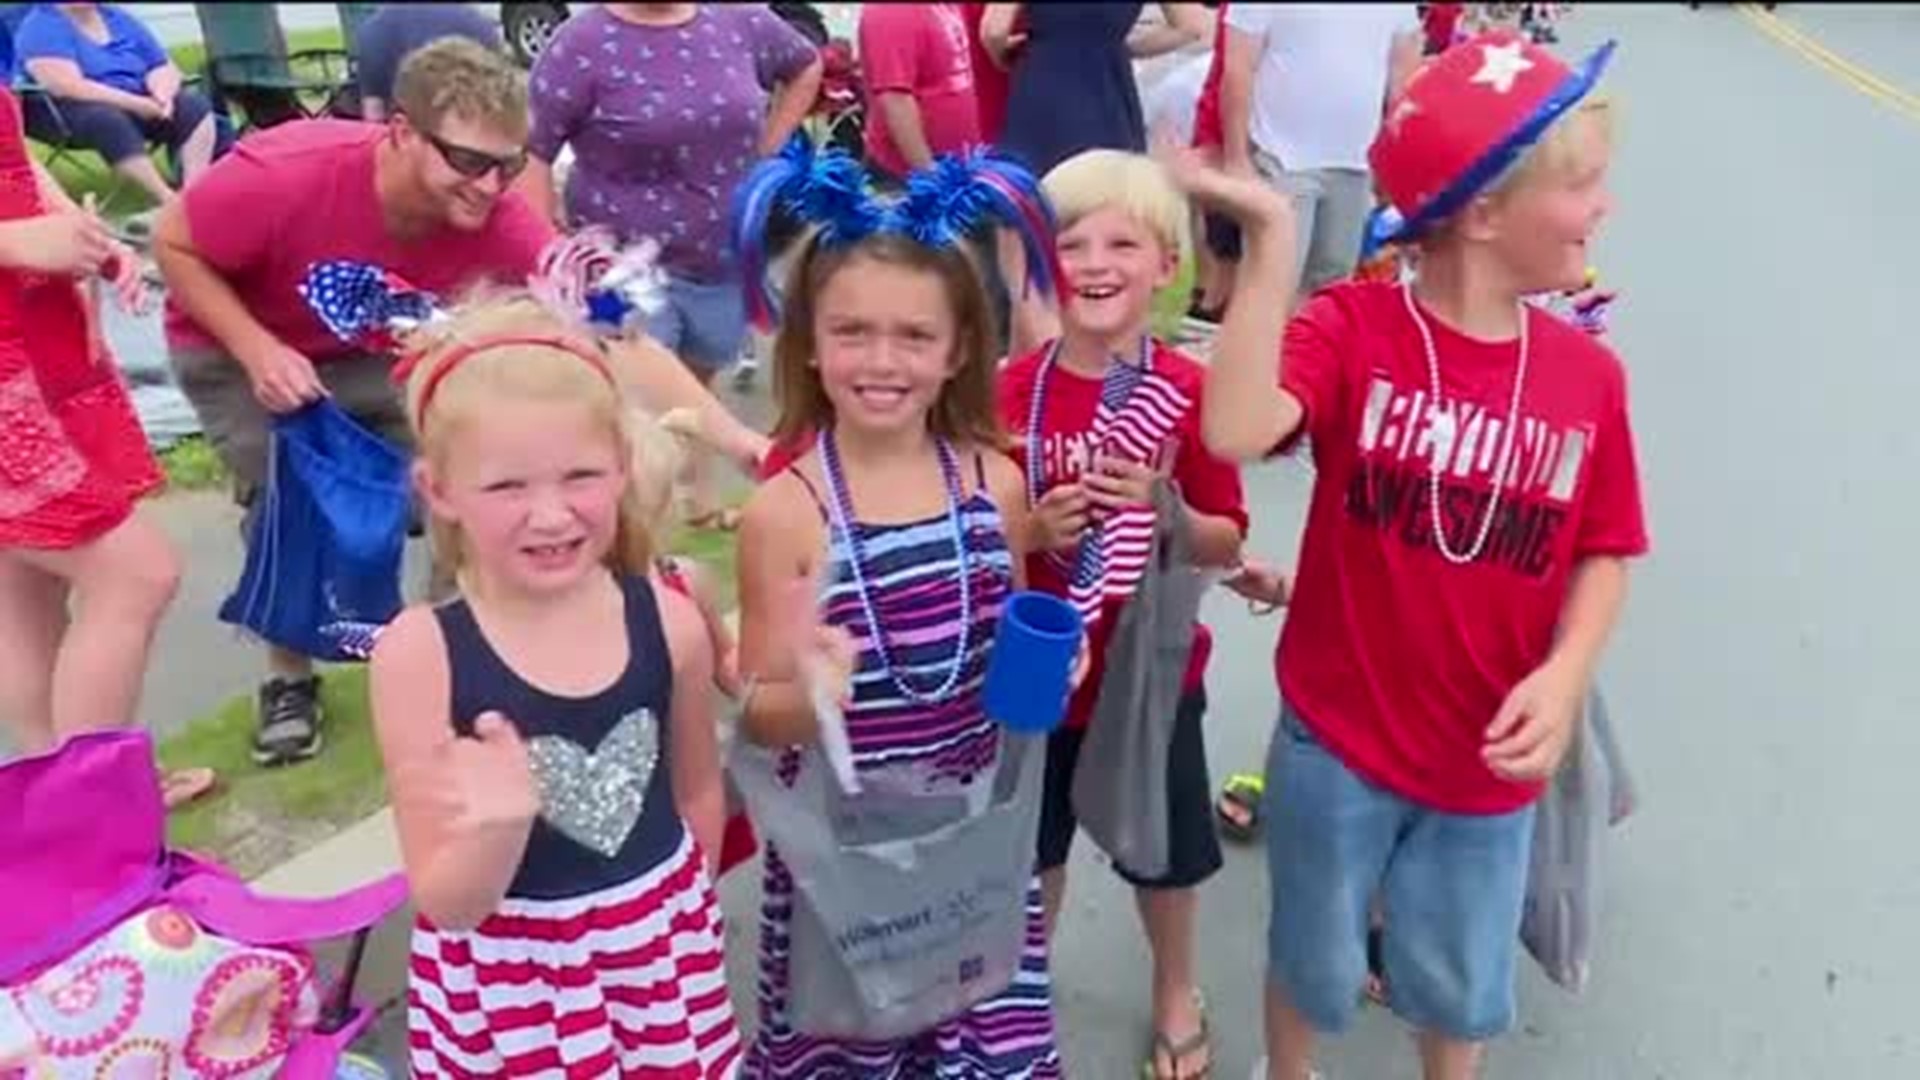 Susquehanna County Celebrates the Fourth of July